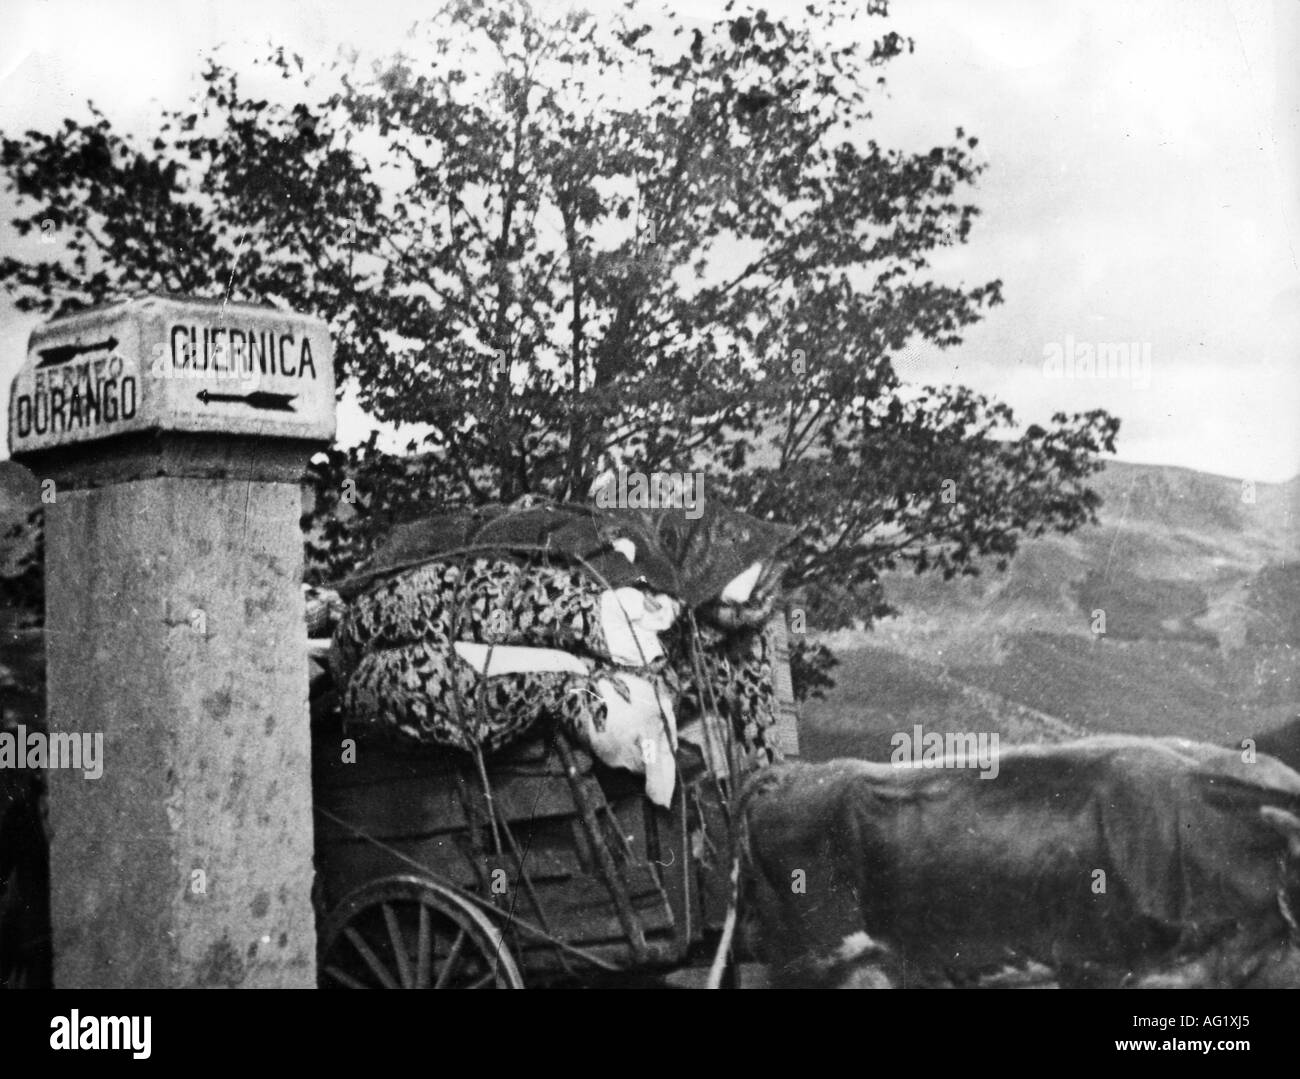 geography / travel, Spain, Spanish Civil War 1936 - 1939, Basque Region, 1937, oxen cart passing a direction sign to Guernica/Durango, 20th century, Gernika, historic, historical, 1930s, transportation, transporting, Europe, people, Stock Photo